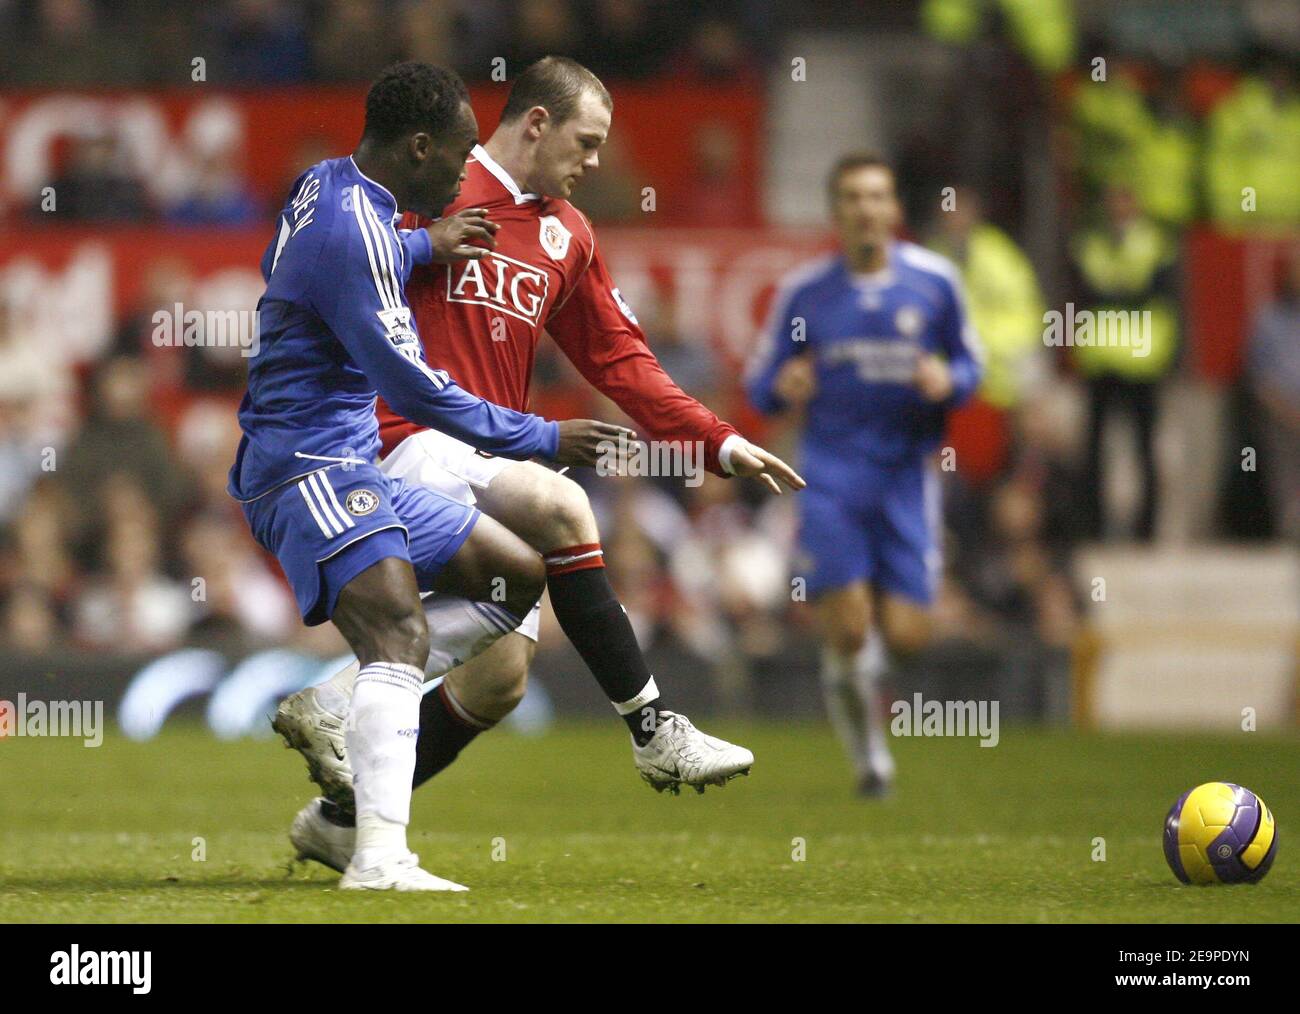 Chelsea's Michael Essien and Manchester United's Wayne Rooney battle for the ball during the FA Barclays Premiership, Manchester United vs Chelsea at the Old Trafford stadium in Manchester,UK on November 26, 2006. The match ended in a 1-1 draw. Photo by Christian Liewig/ABACAPRESS.COM Stock Photo